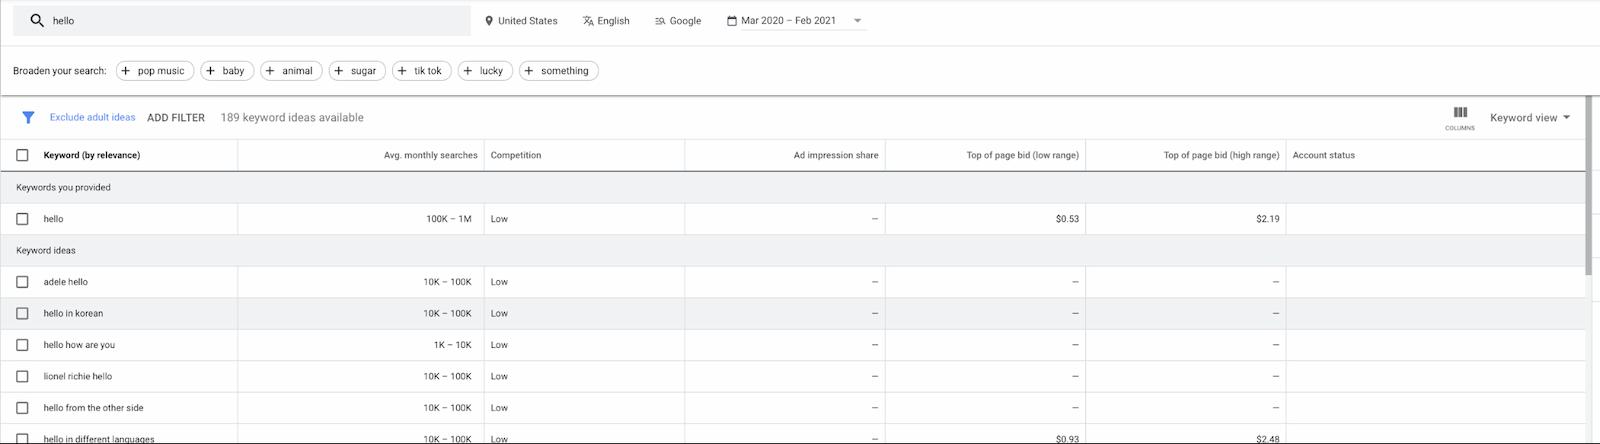 Google Keyword Planner shows related keywords and their CPC